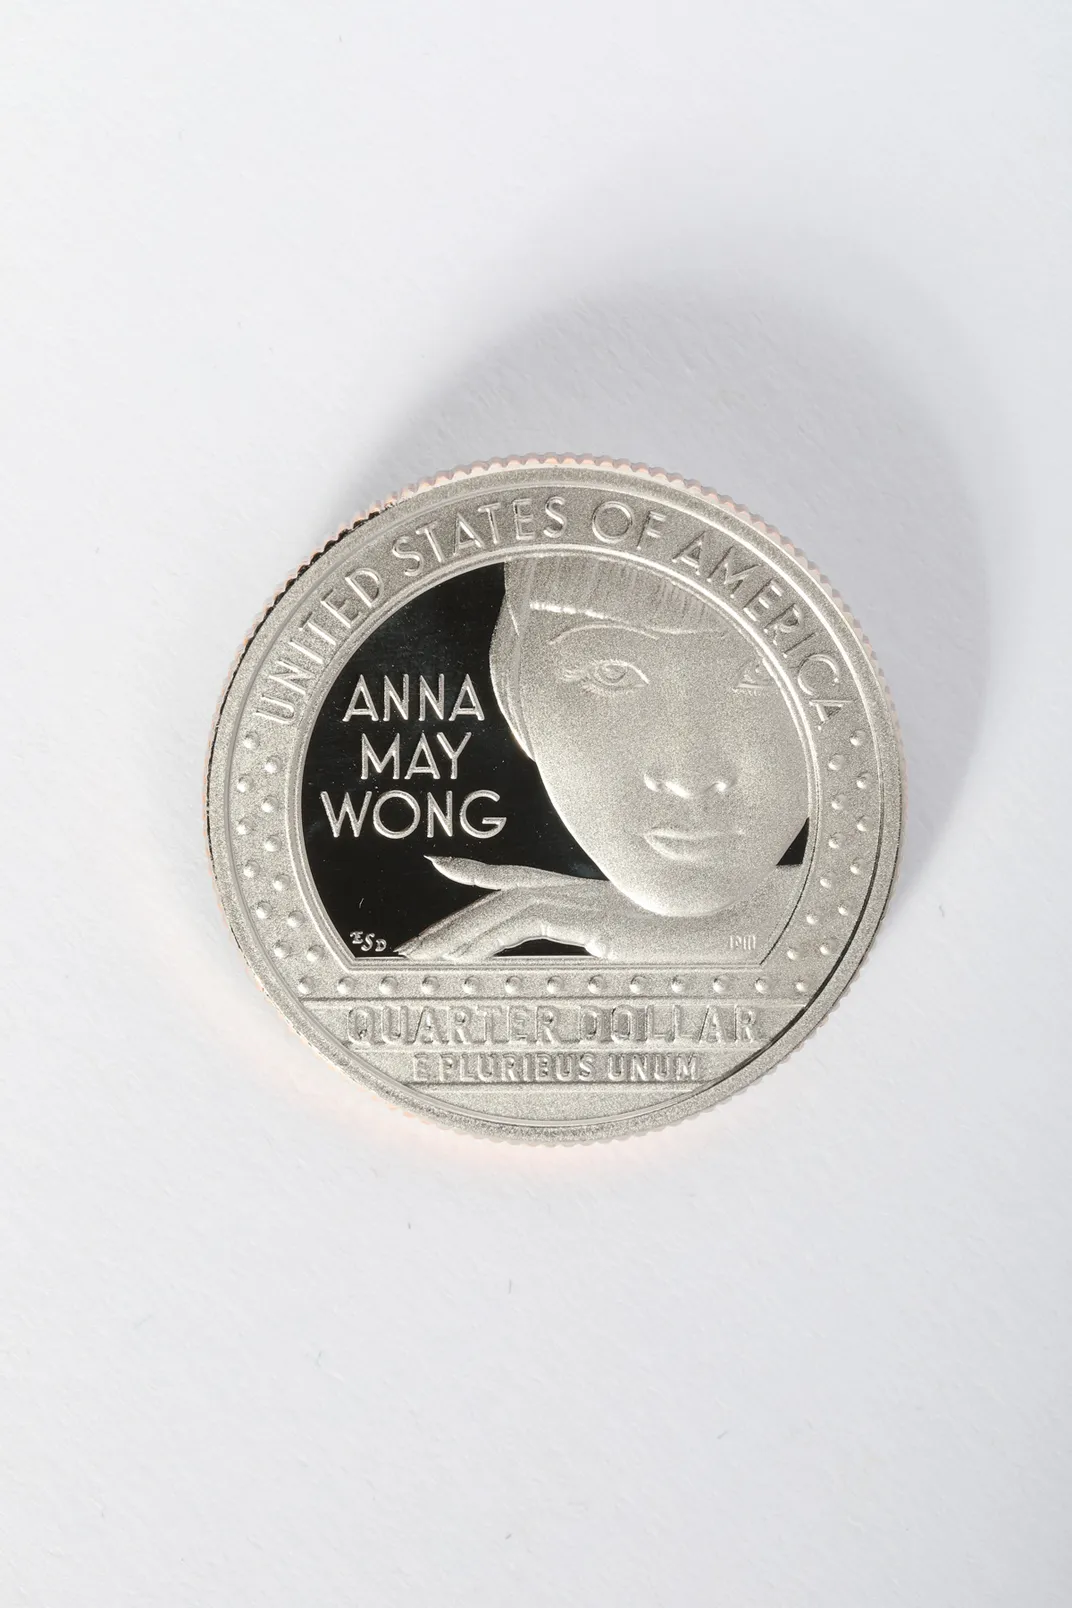 Reverse side of a quarter featuring Anna May Wong’s name and likeness